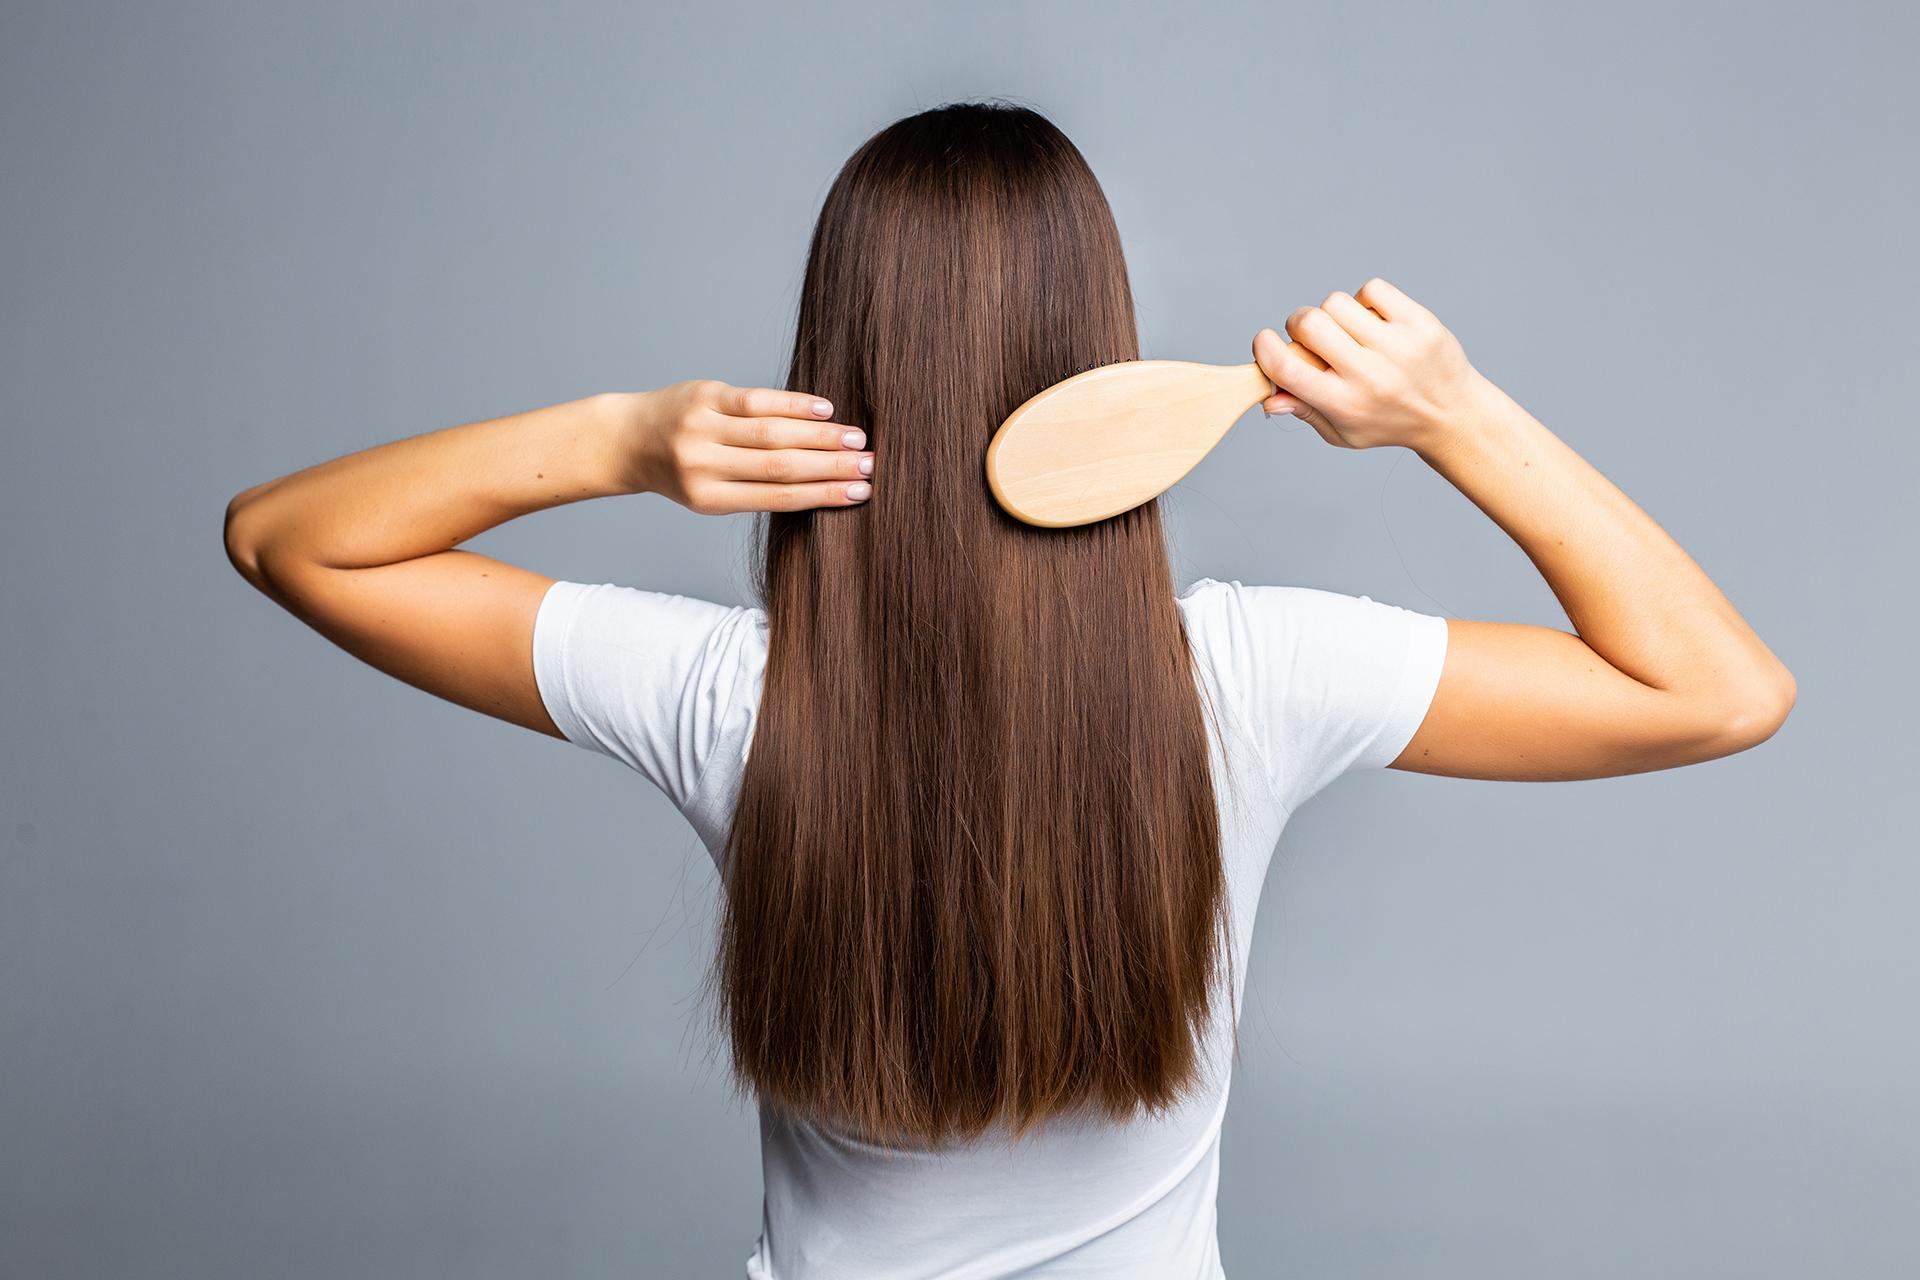 10 Essential Hair Growth Tips To Make Your Hair Grow Longer And Faster